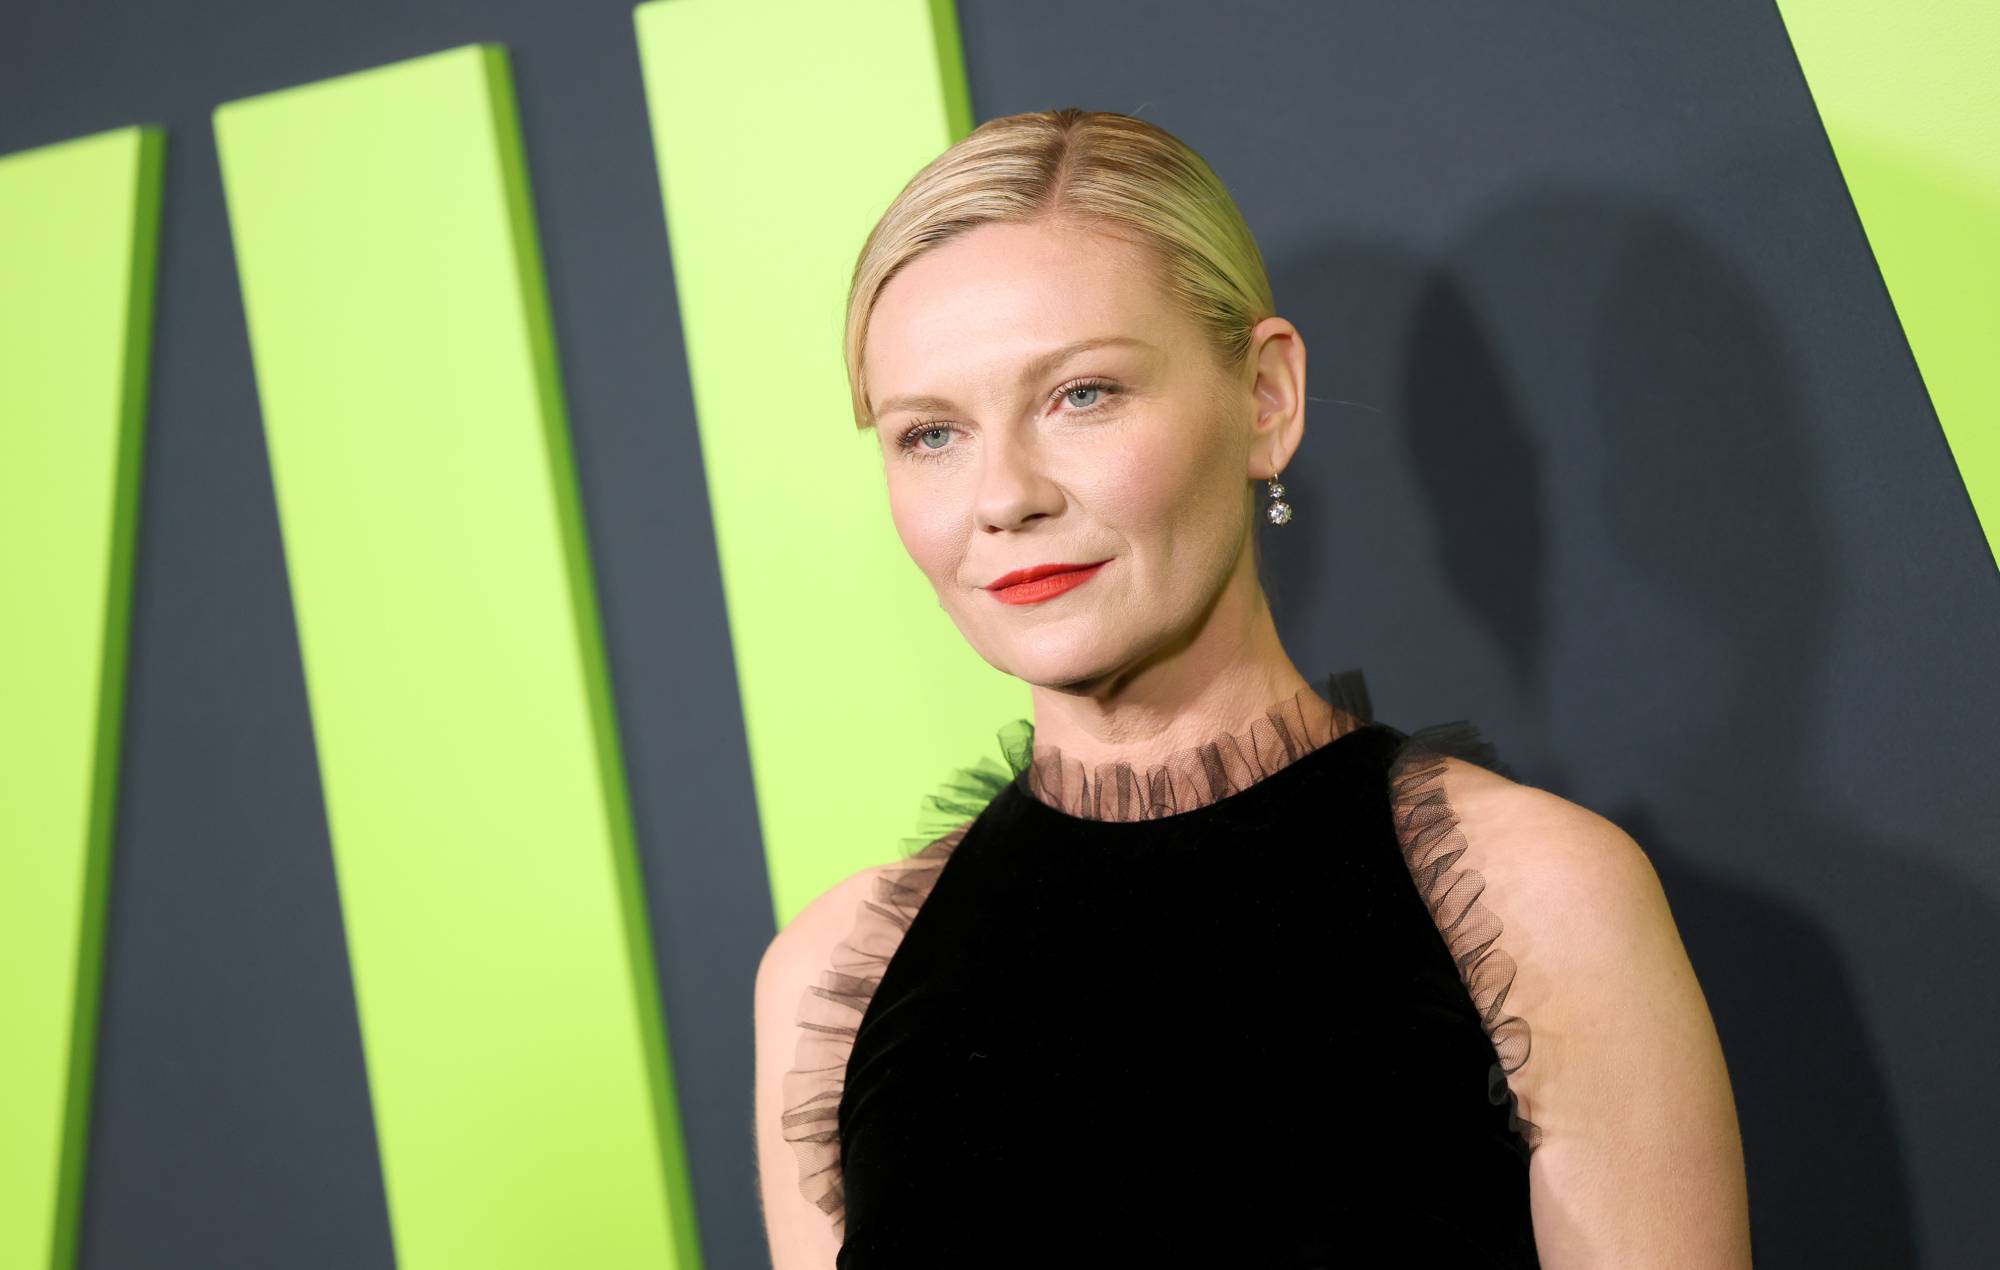 Kirsten Dunst was “miserable” shooting iconic upside-down kiss in ‘Spider-Man’